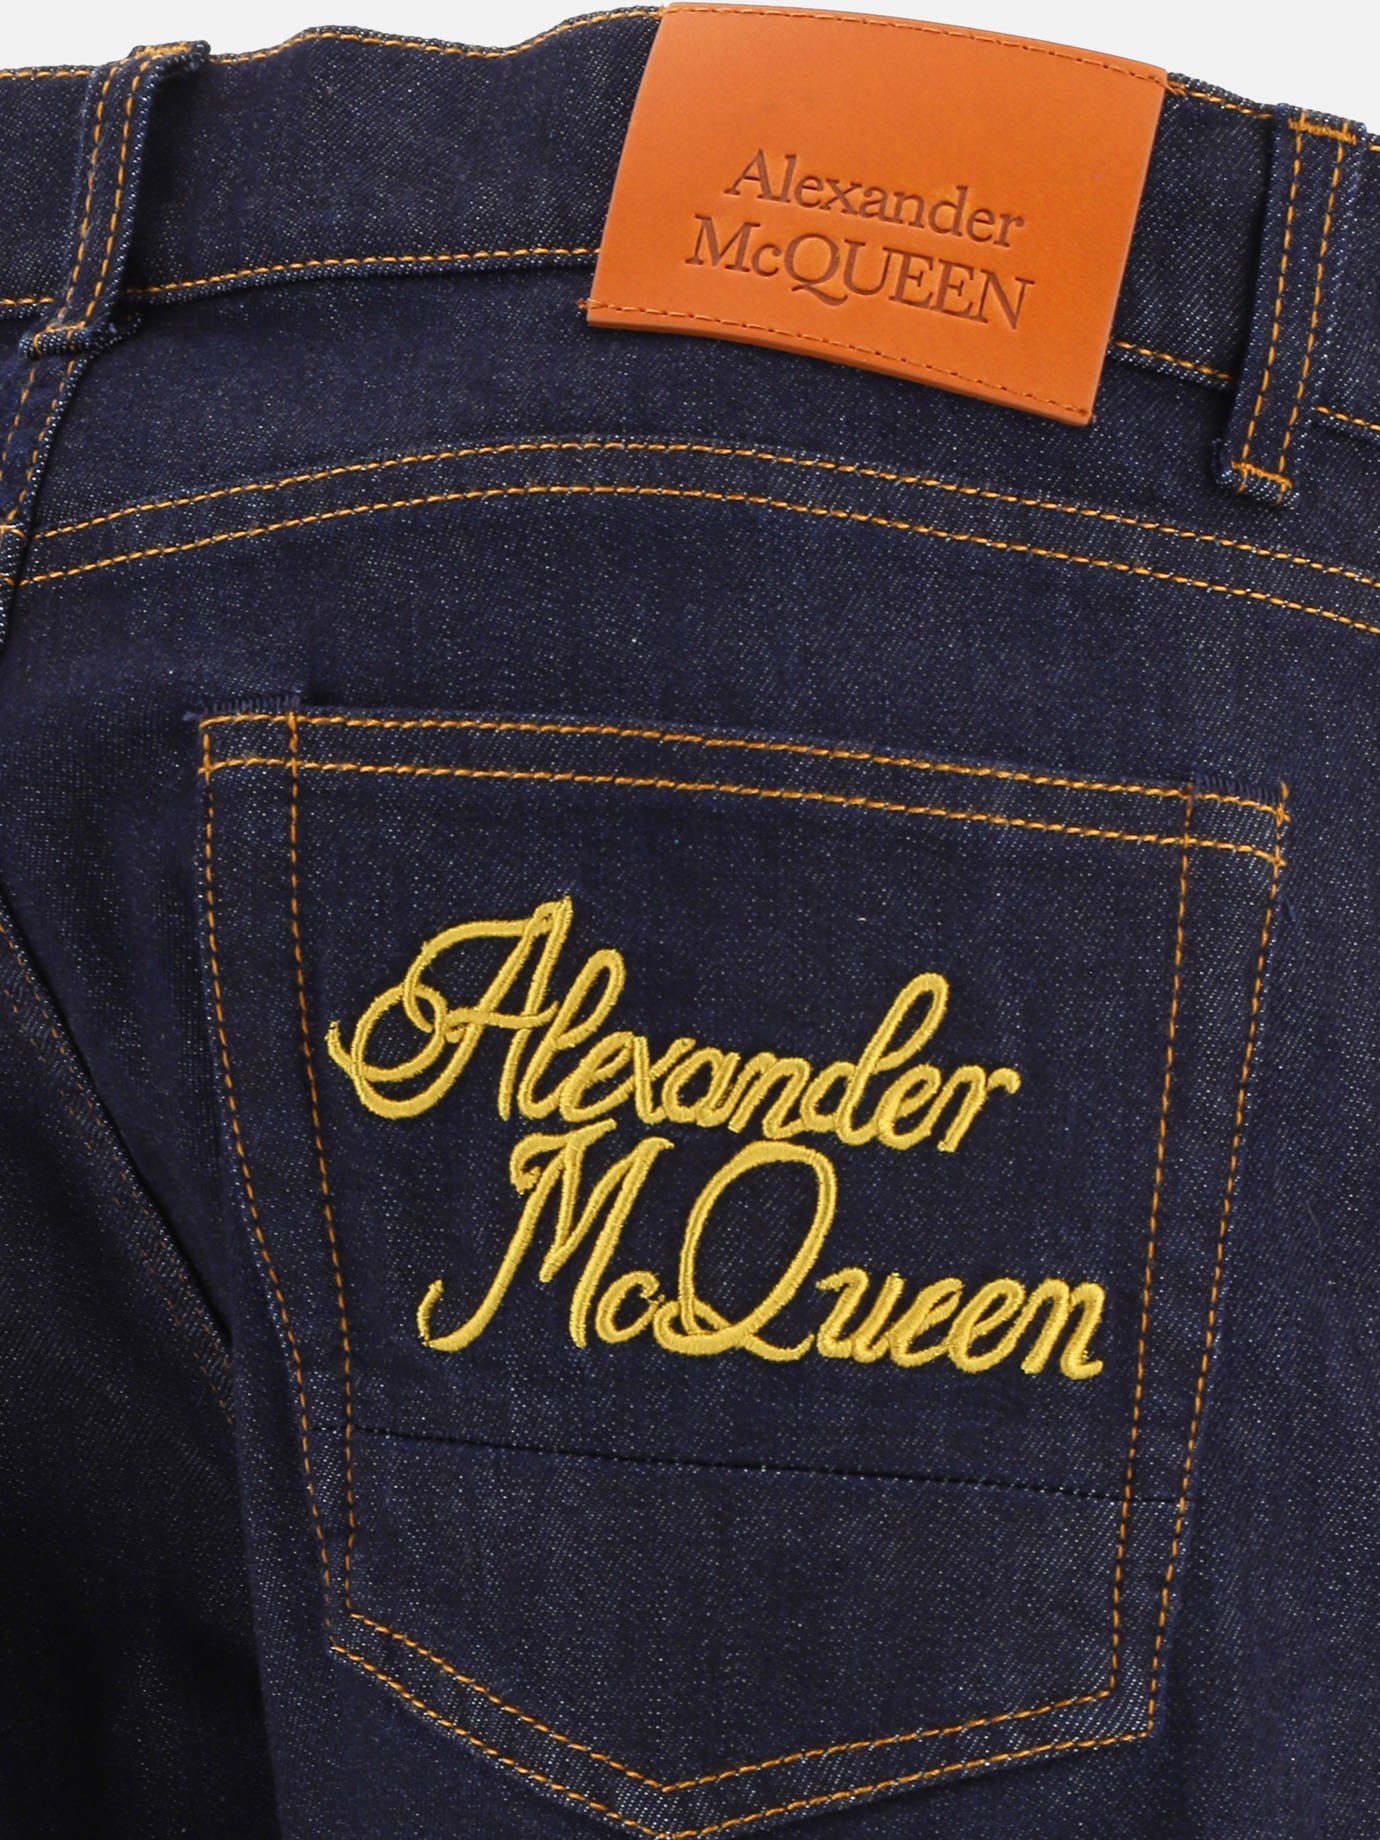 Jeans with embroidery by Alexander McQueen